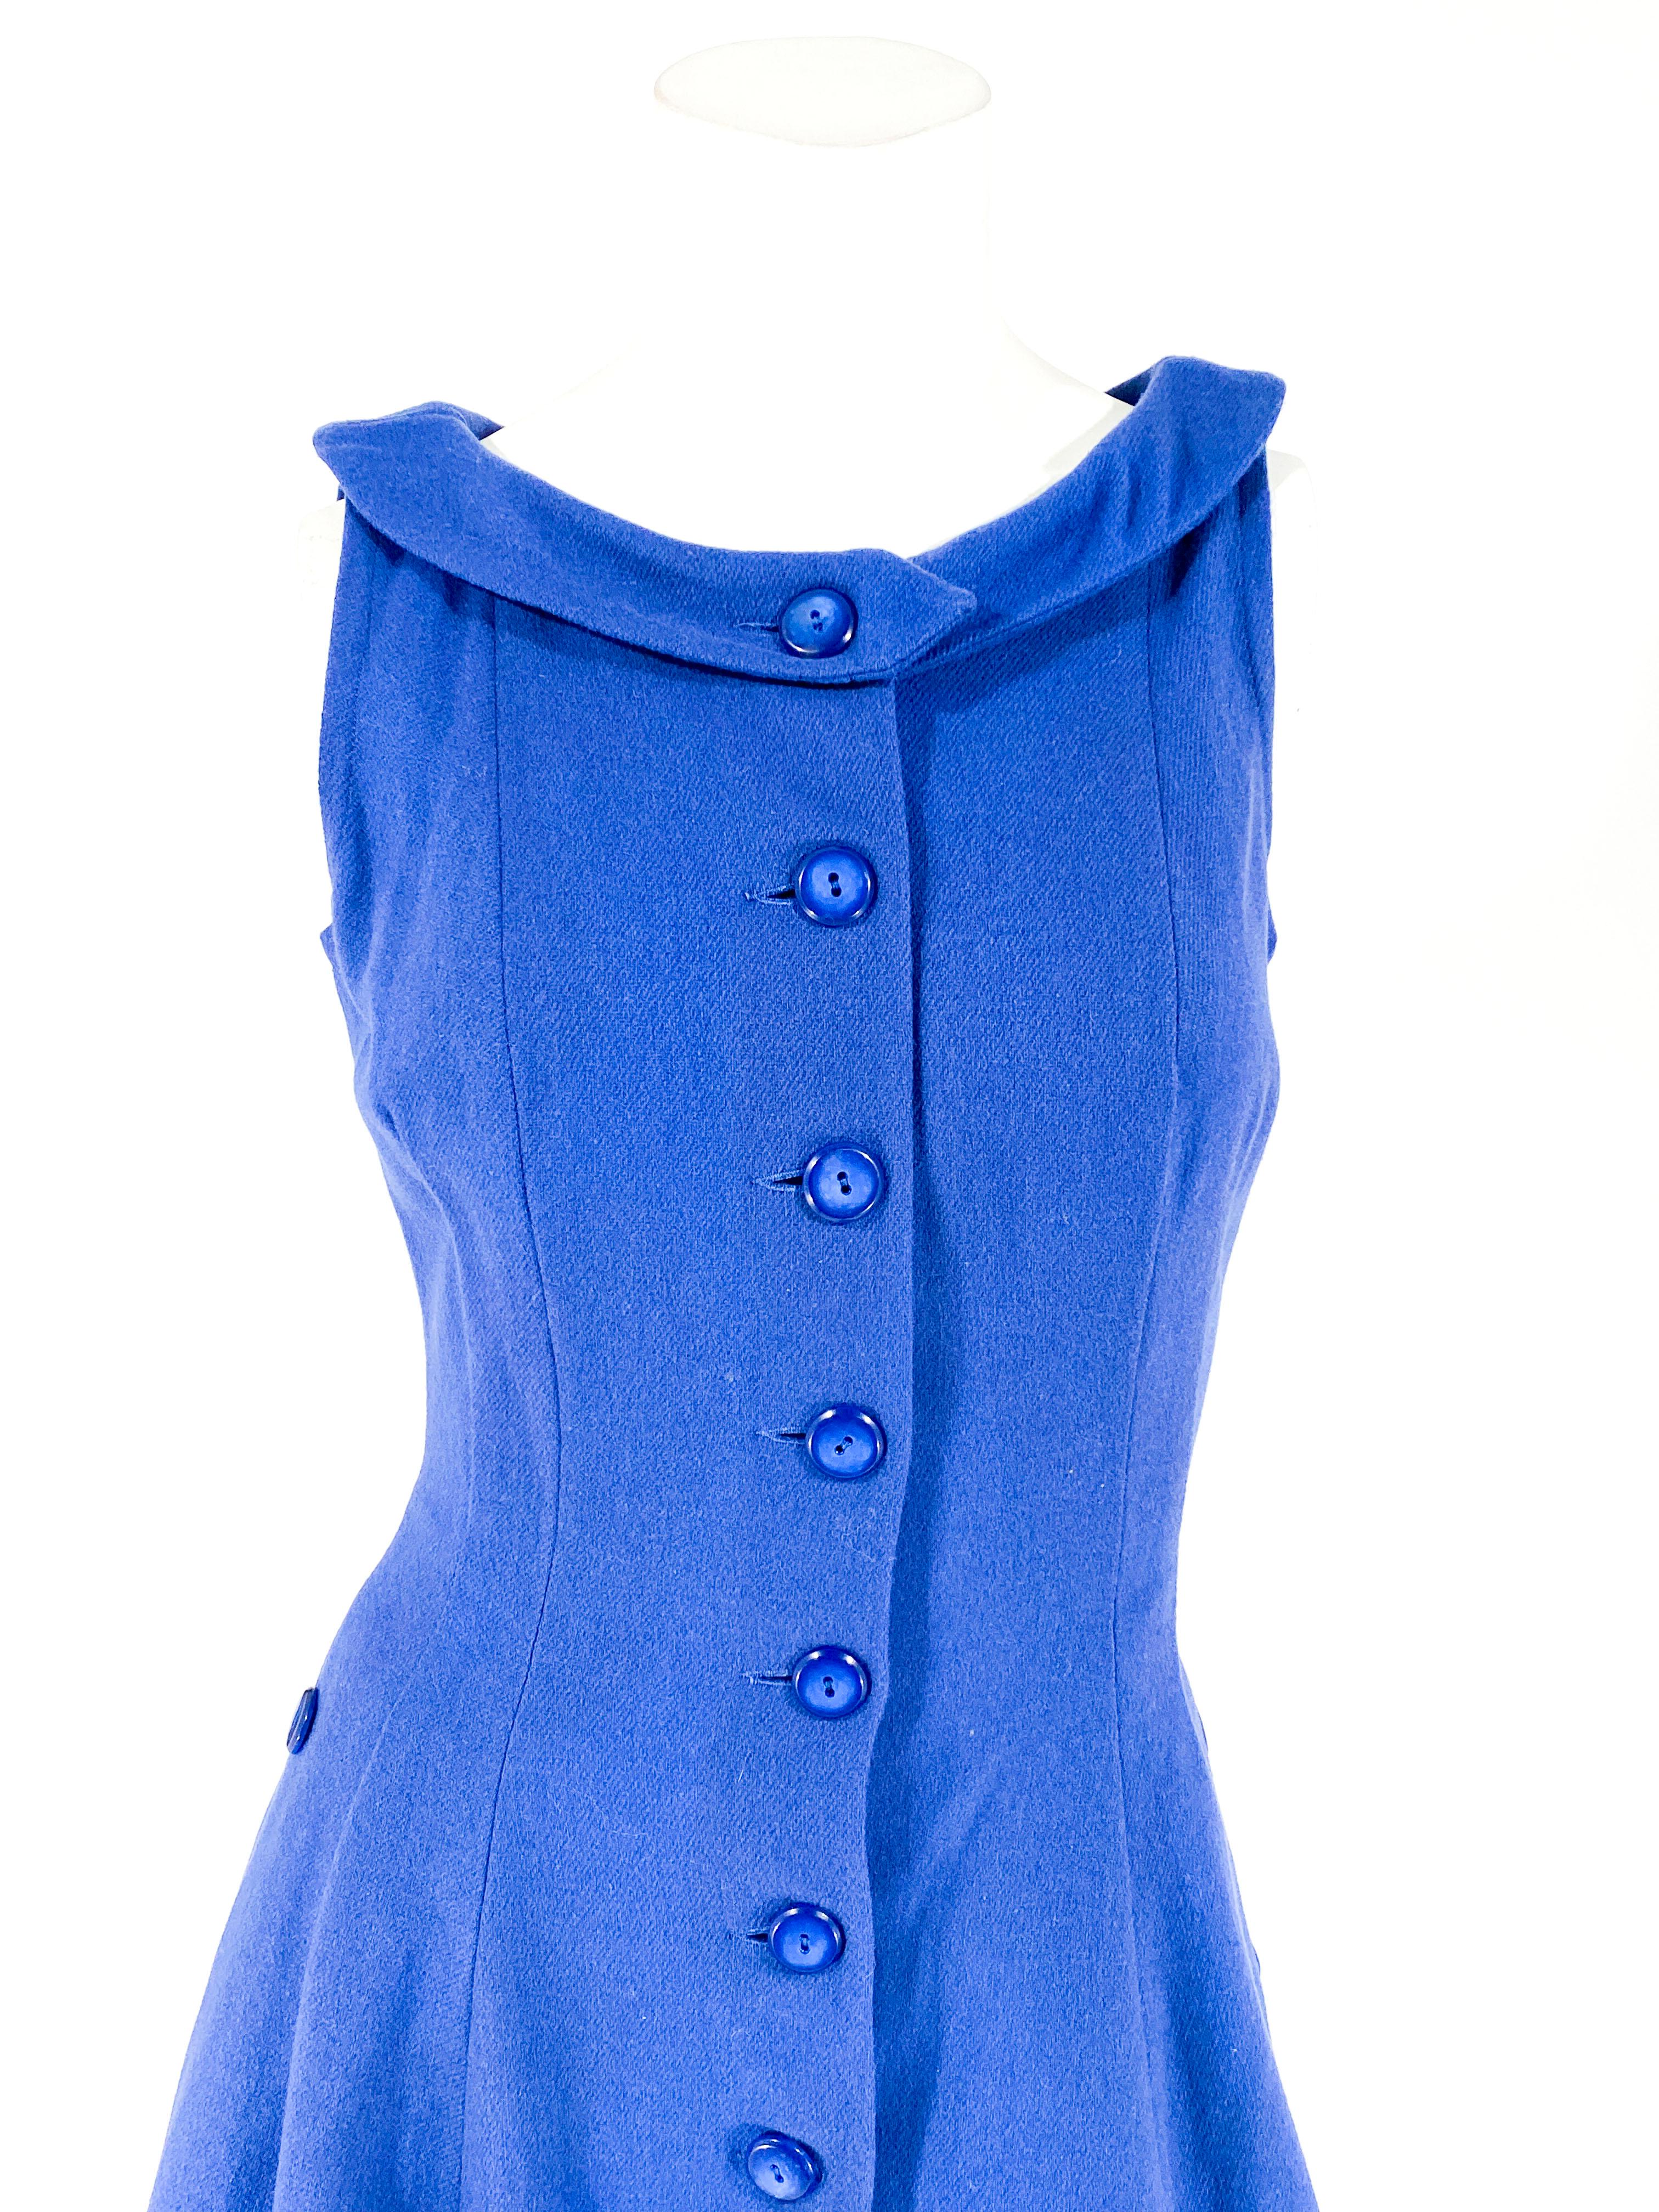 1960s blue wool dress fitted to the waist with a flared skirt. The face of the dress has a button closure the goes down past the hip. The sides are adorned with additional buttons that accent the hidden pockets. The scooped neckline has a narrow